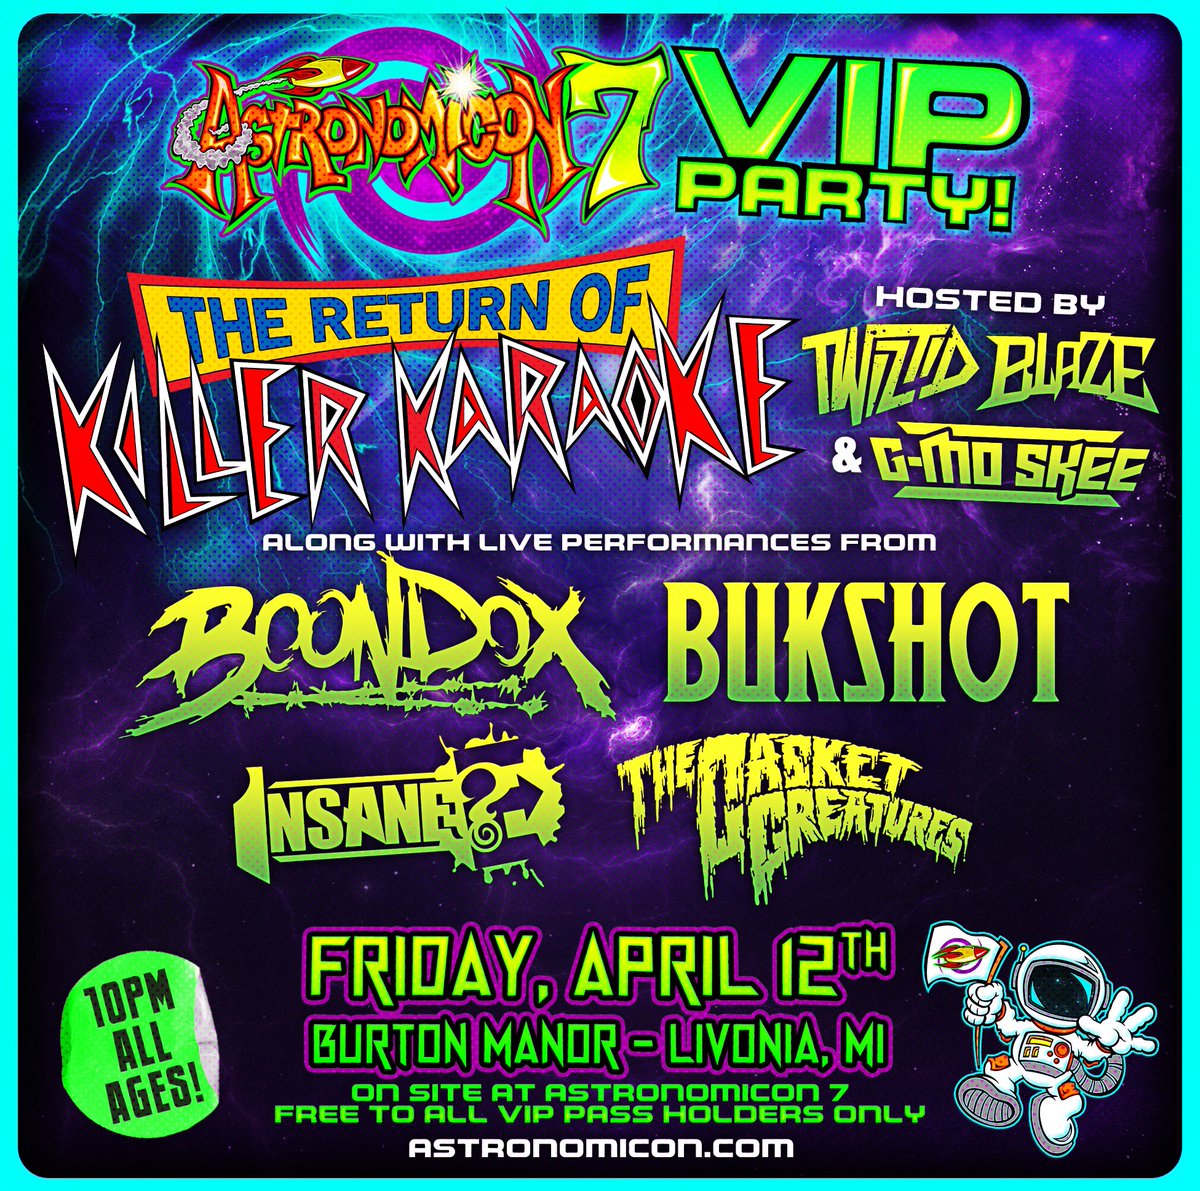 🚀 Concert Announcement ‼️ Friday night at the VIP party witness live performances from @TurnCoat_Dirty @Bukshizzle @InsaneEric & Casket Creatures. We heard your requests & are also bringing back Killer Karaoke! 💨@tweetmesohard @BlazeYaDead1 @g_mo_skee are your official hosts!